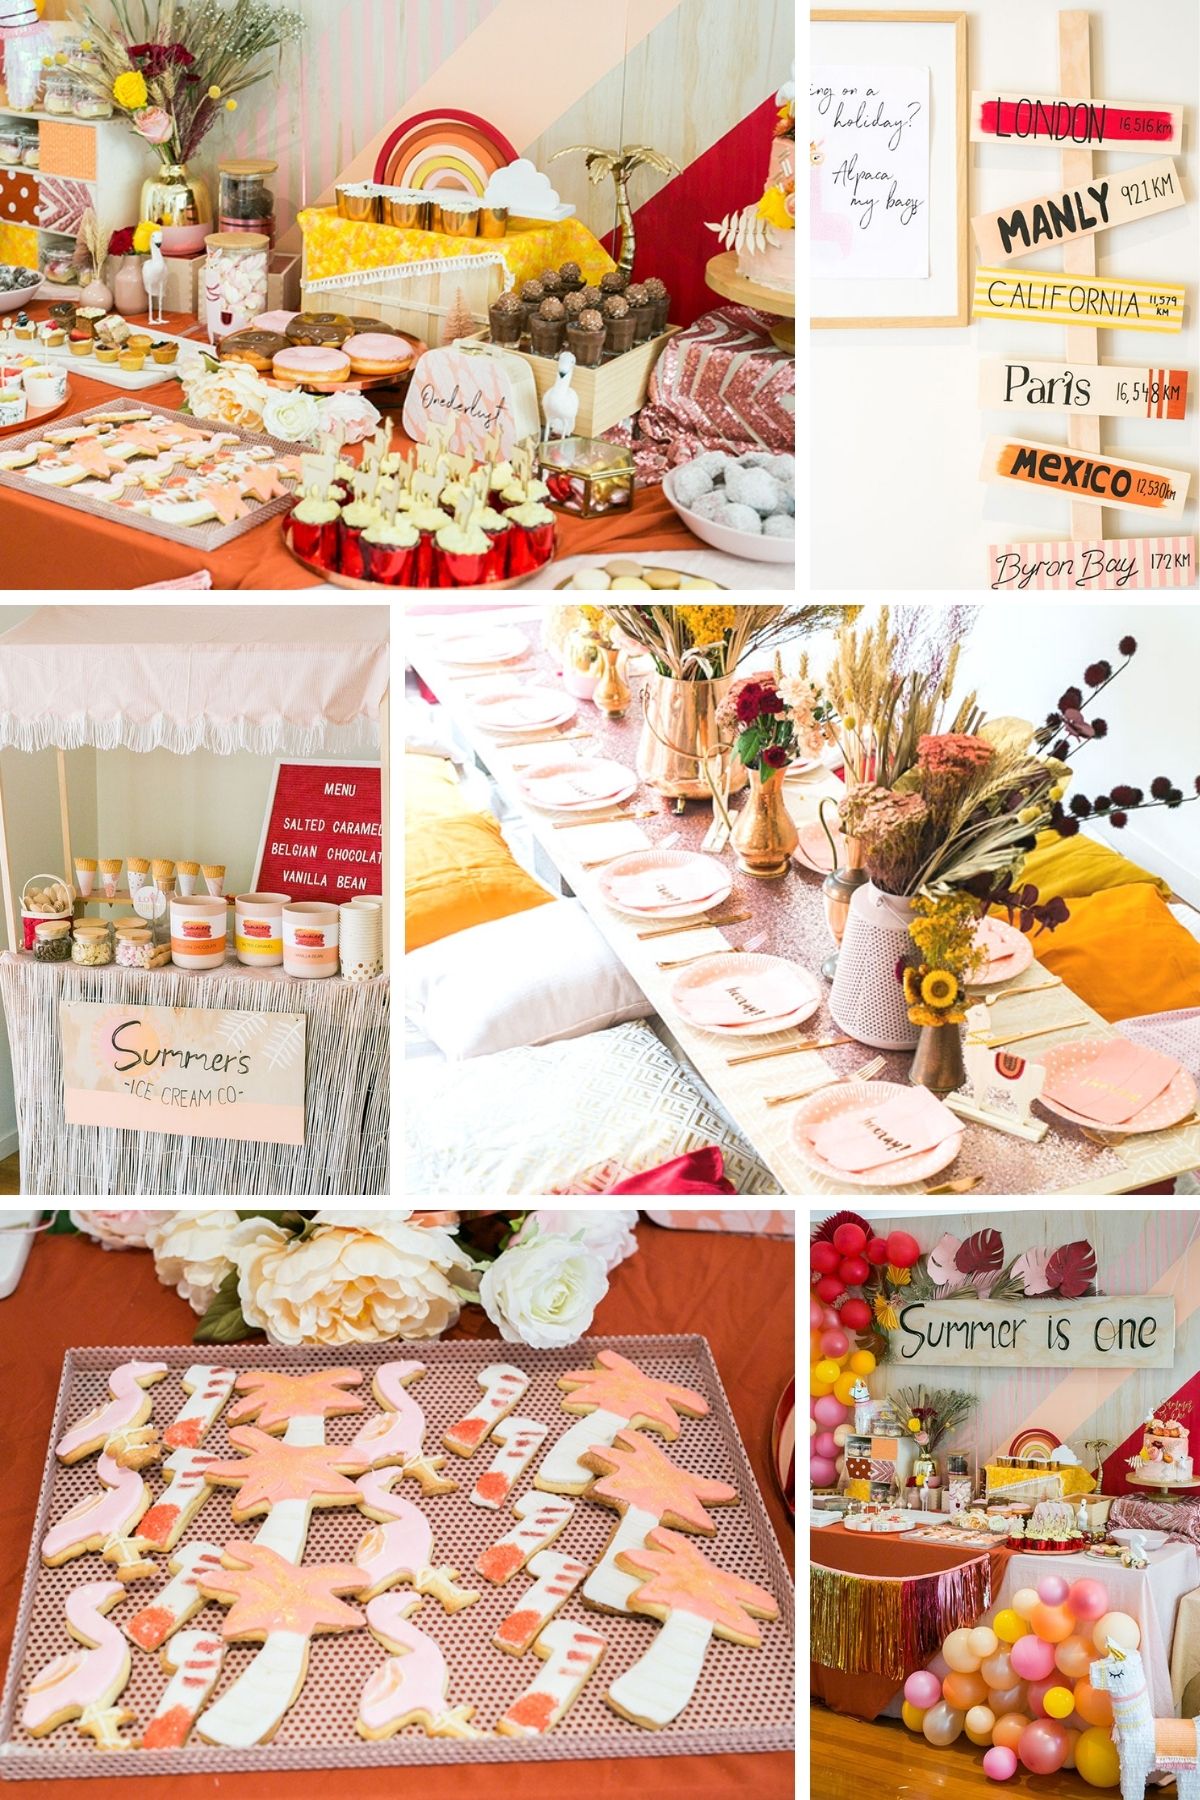 Photo collage for onederlust party theme including cookies, cake, and table settings.